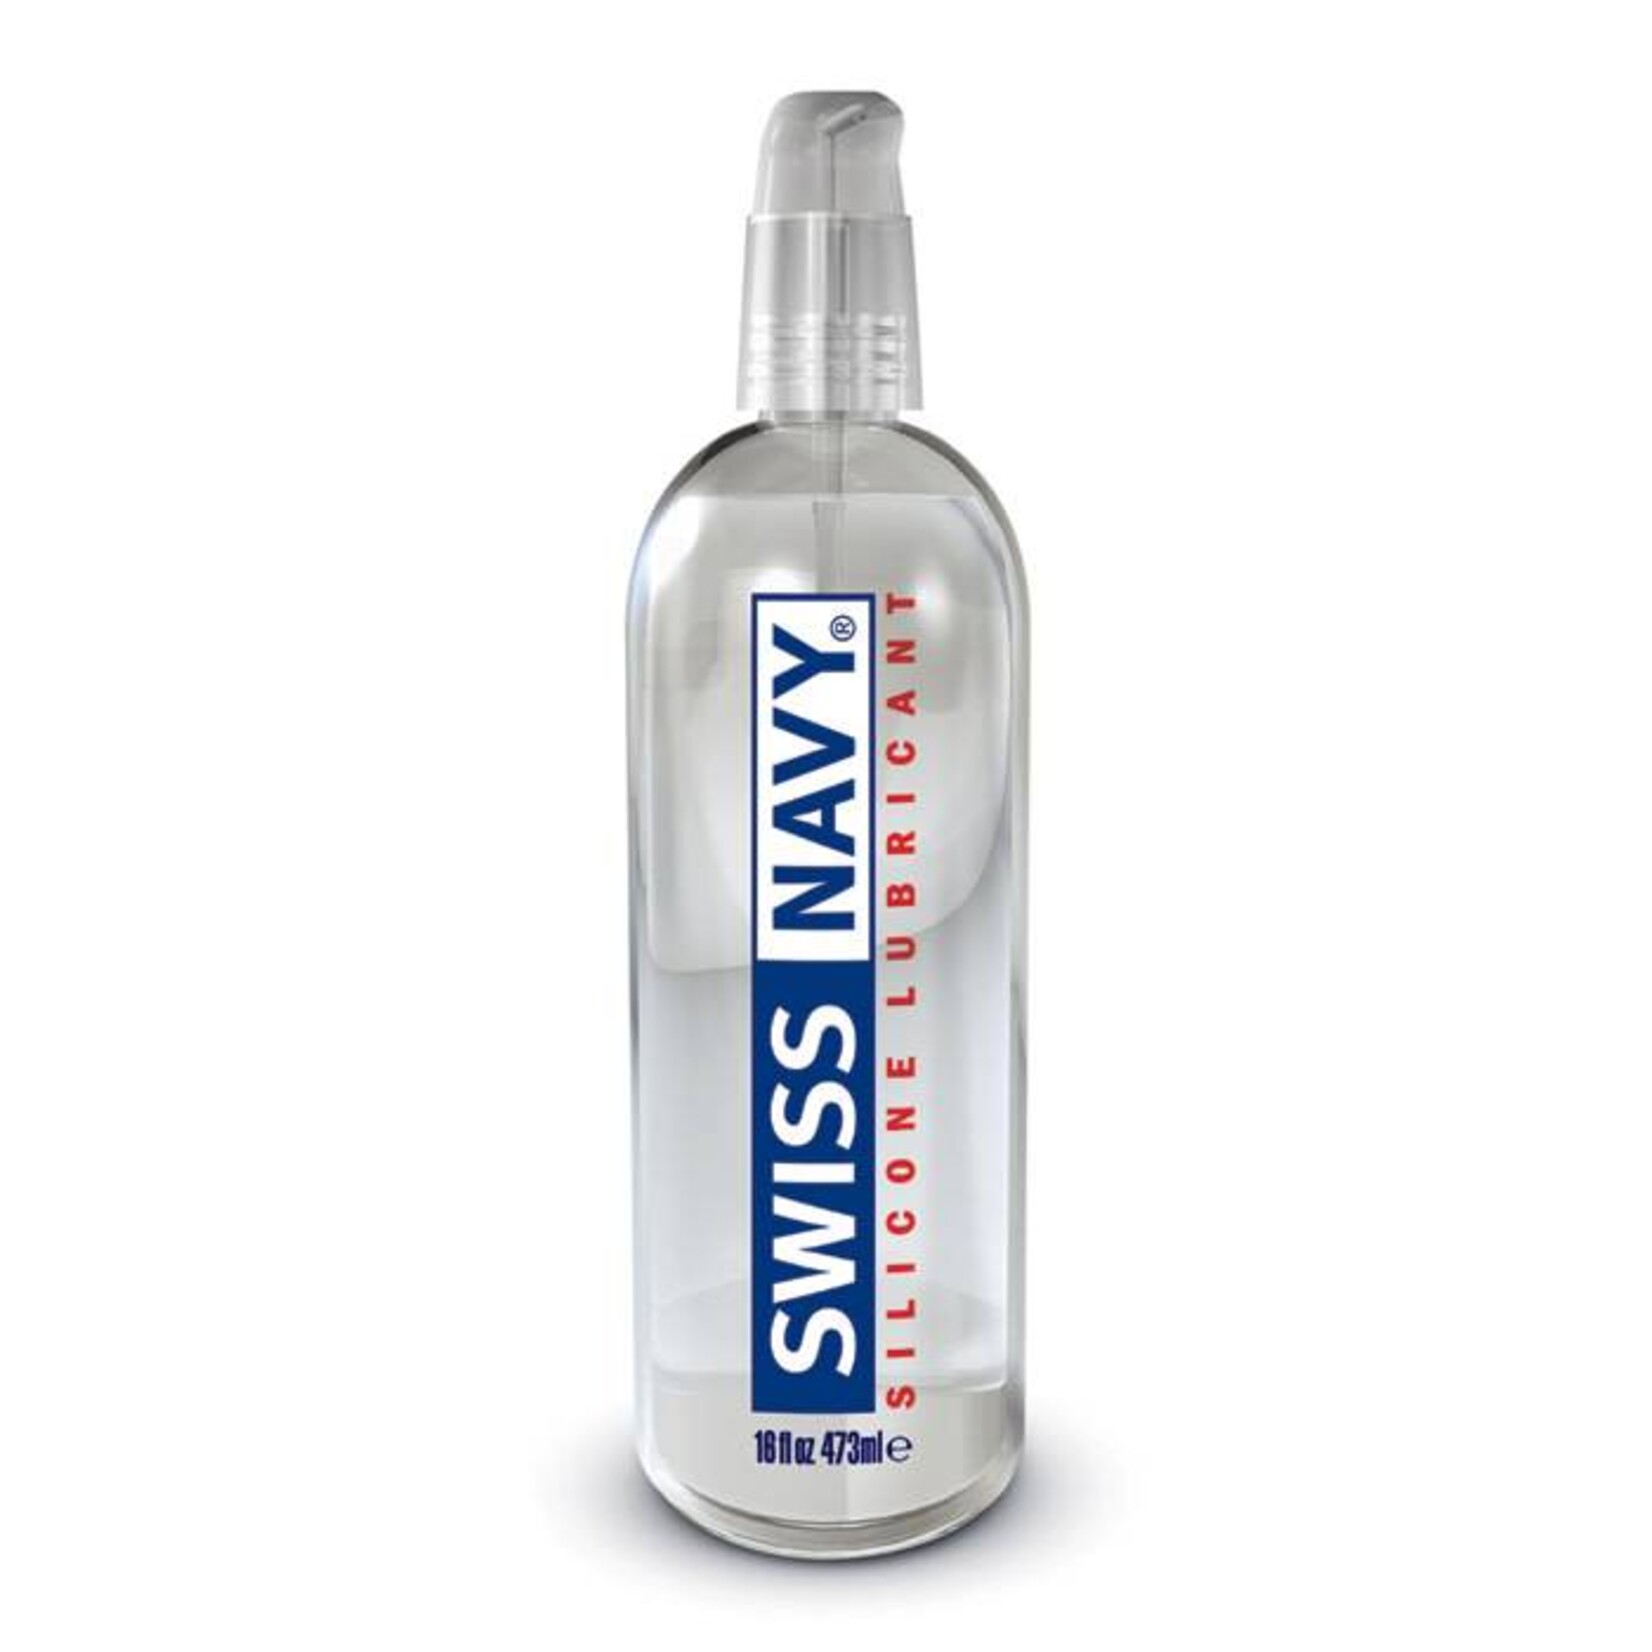 M.D. Science Lab Swiss Navy Silicone-Based Lubricant 16oz